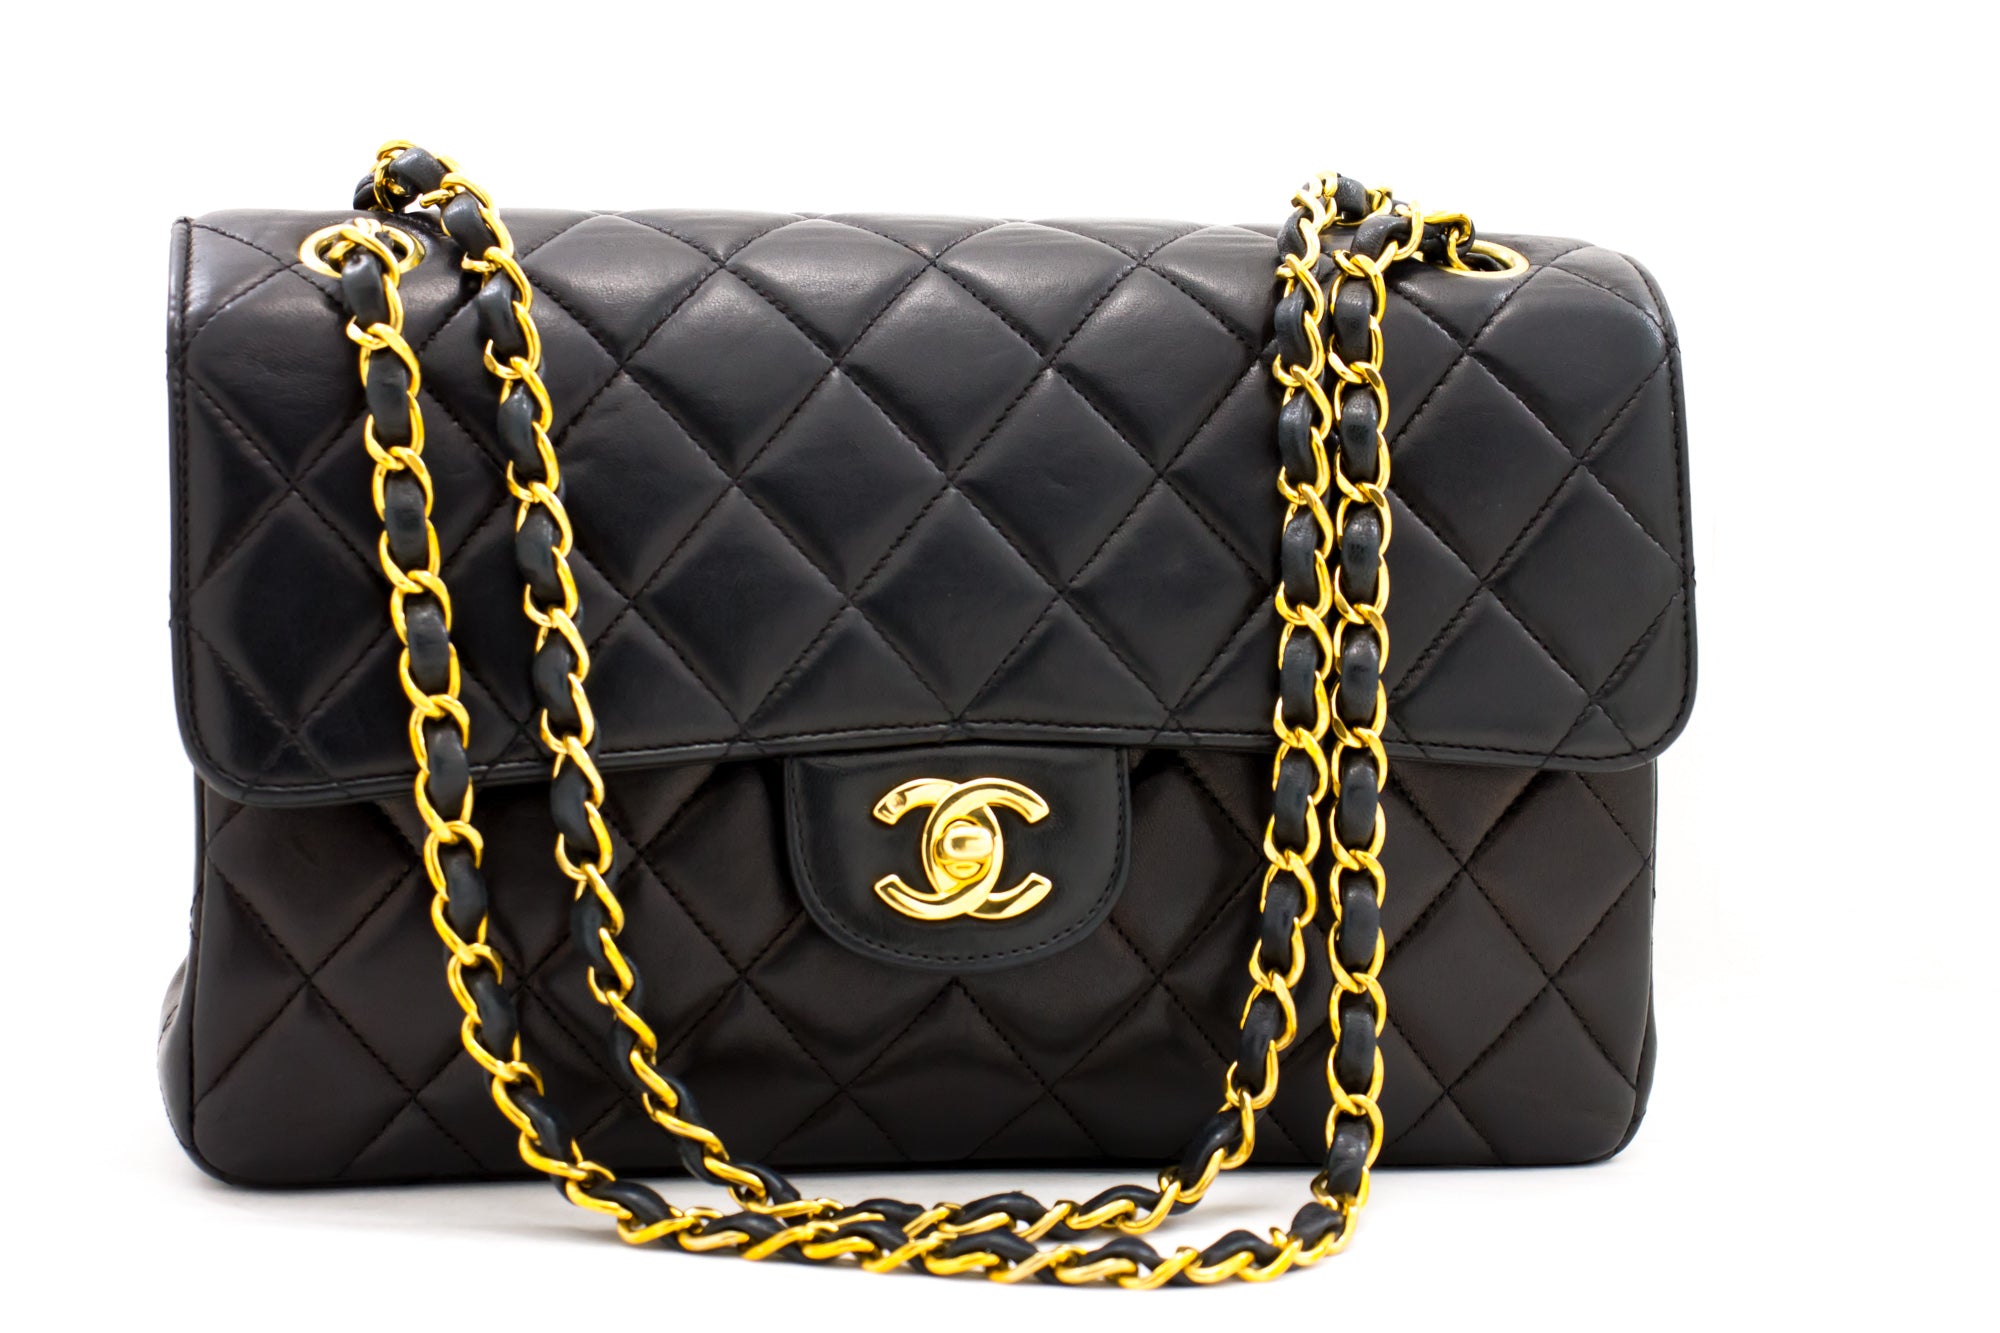 AUTH CHANEL BLACK Quilted Aged Calfskin Miss Pony Fur Double Flap Shoulder  Bag $4,499.00 - PicClick